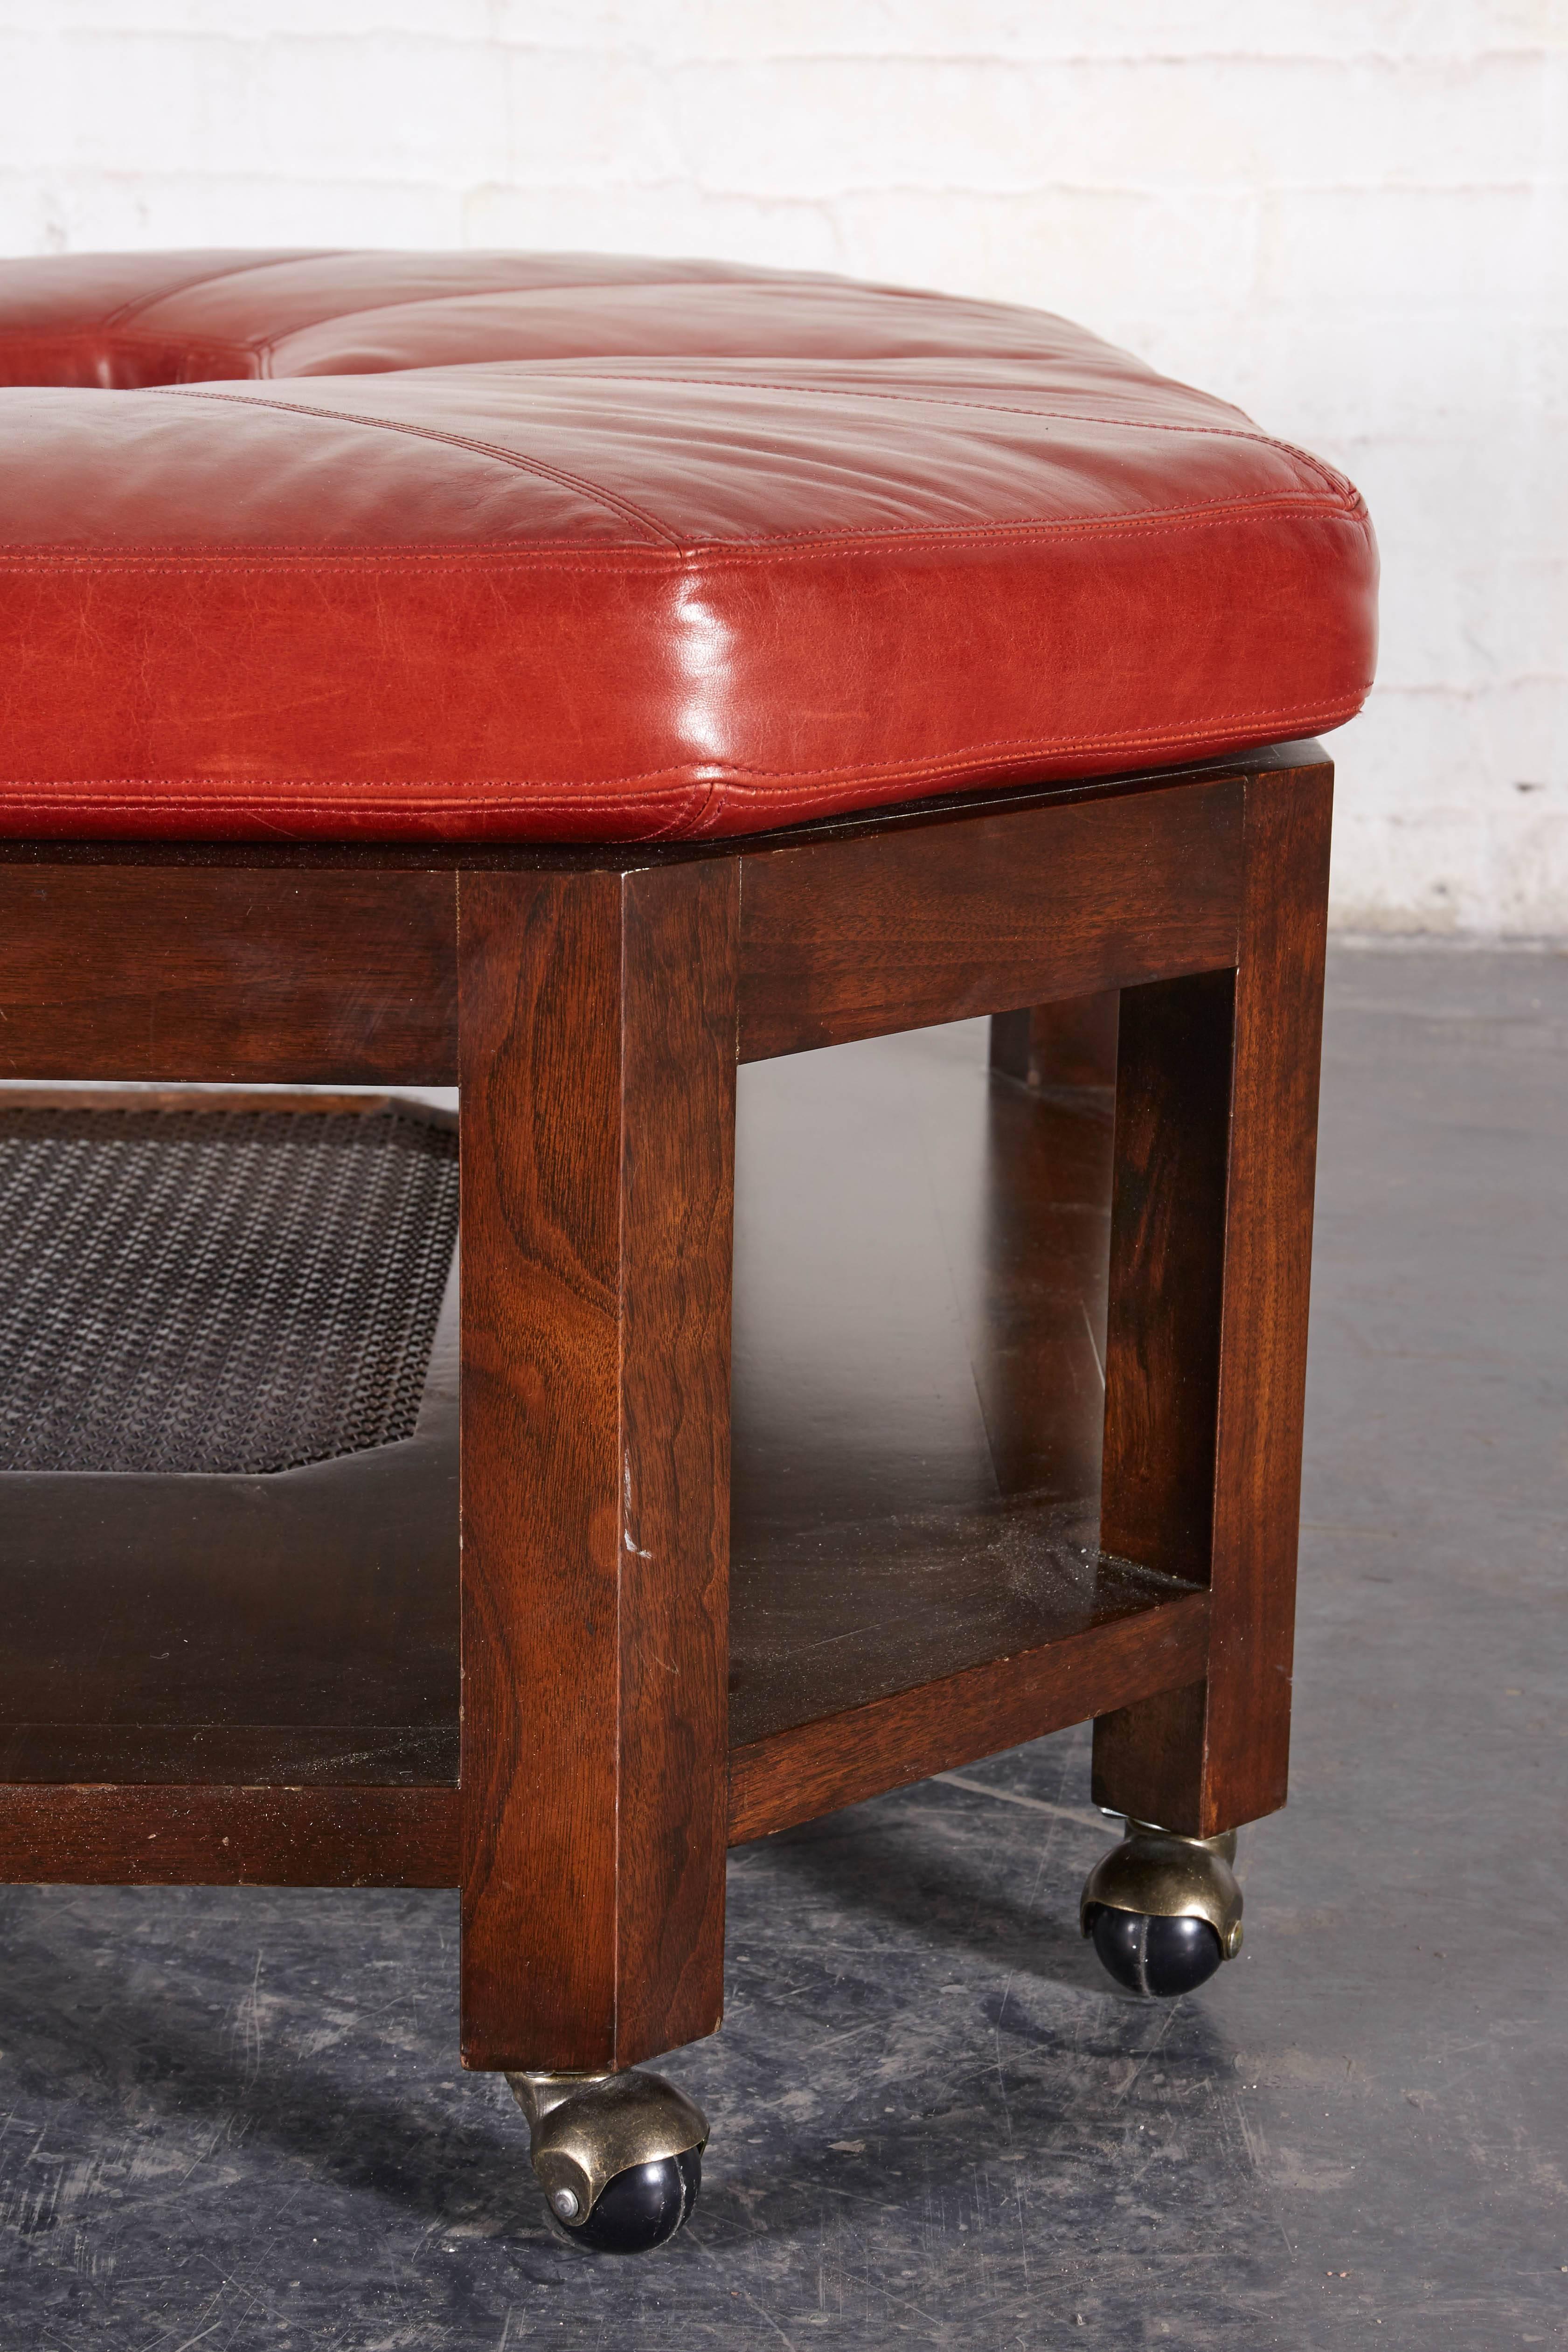 The square top with canted corners surmounted by four leather removable cushions; raised on straight legs joined by a platform shelf centered by a wire recess; on brass casters.